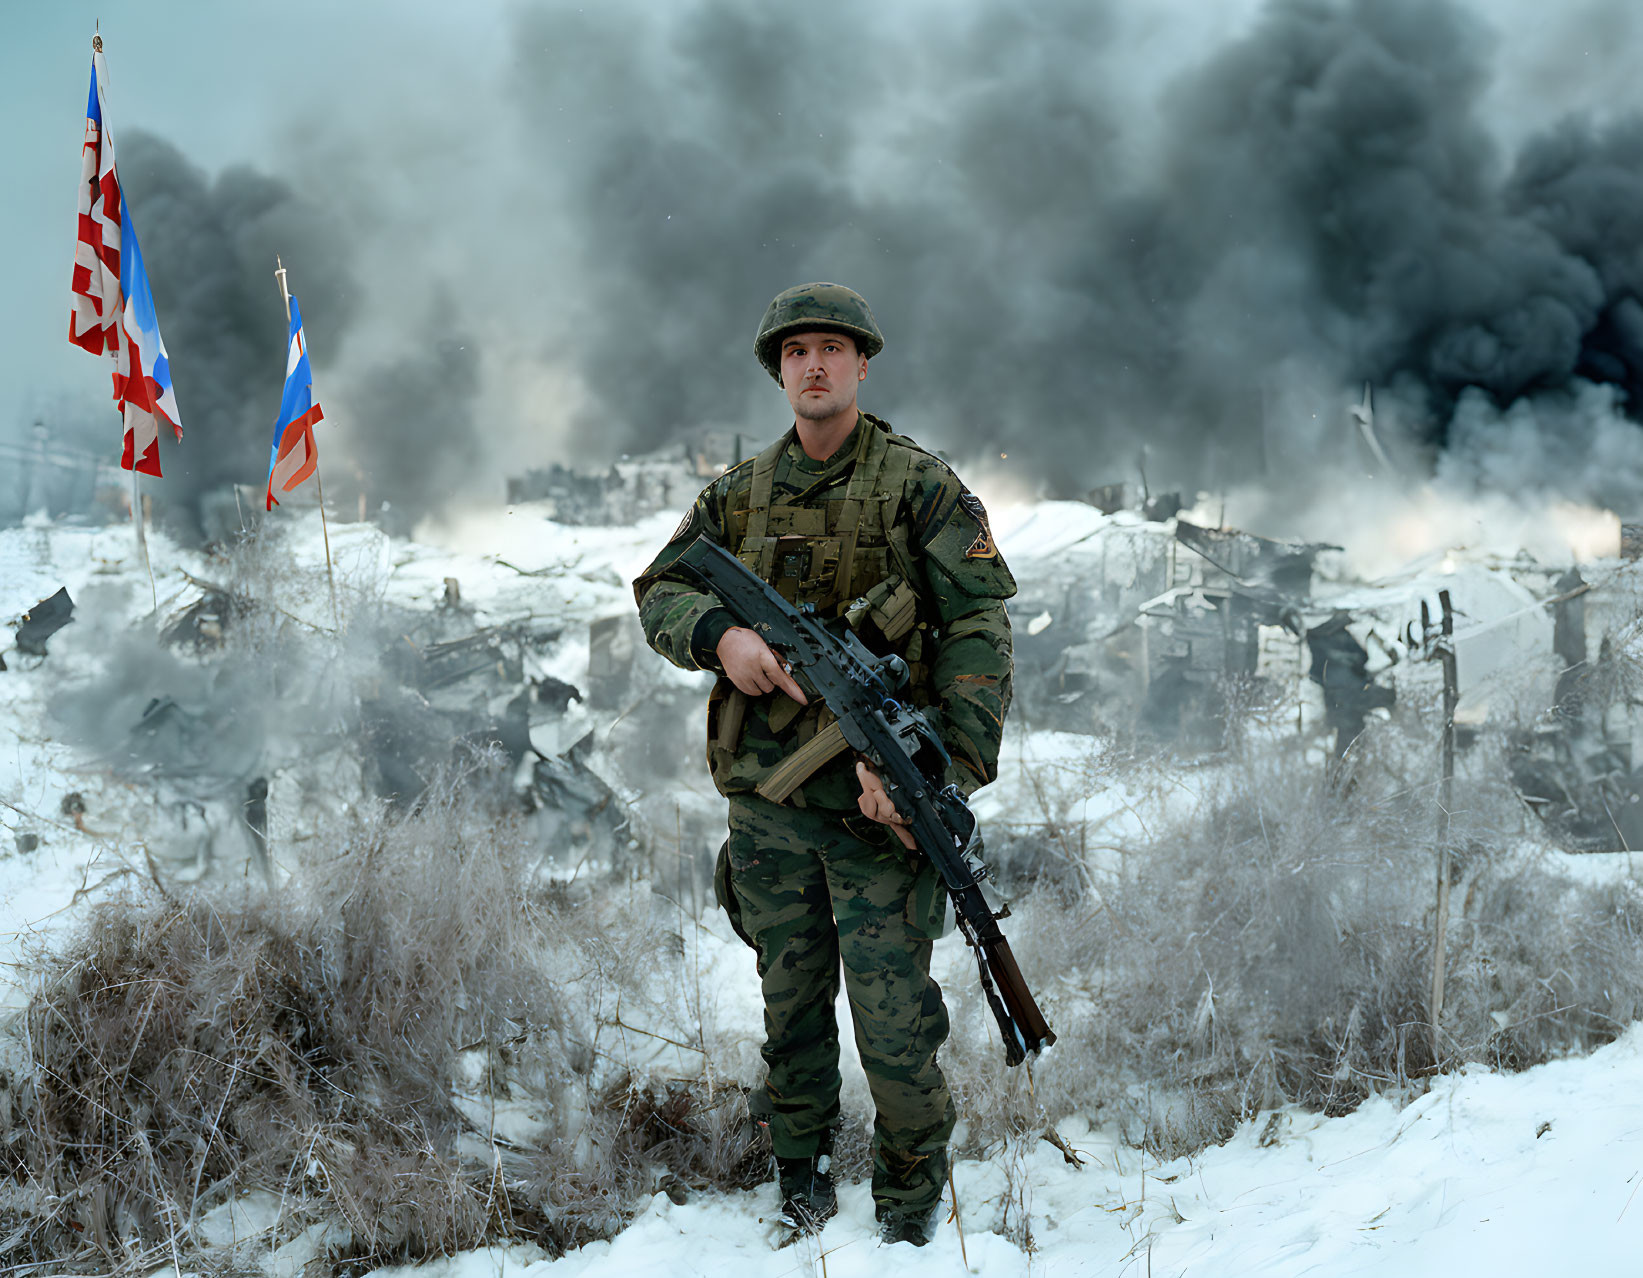 Soldier in camo gear with rifle in smoldering ruins and flags under gloomy sky